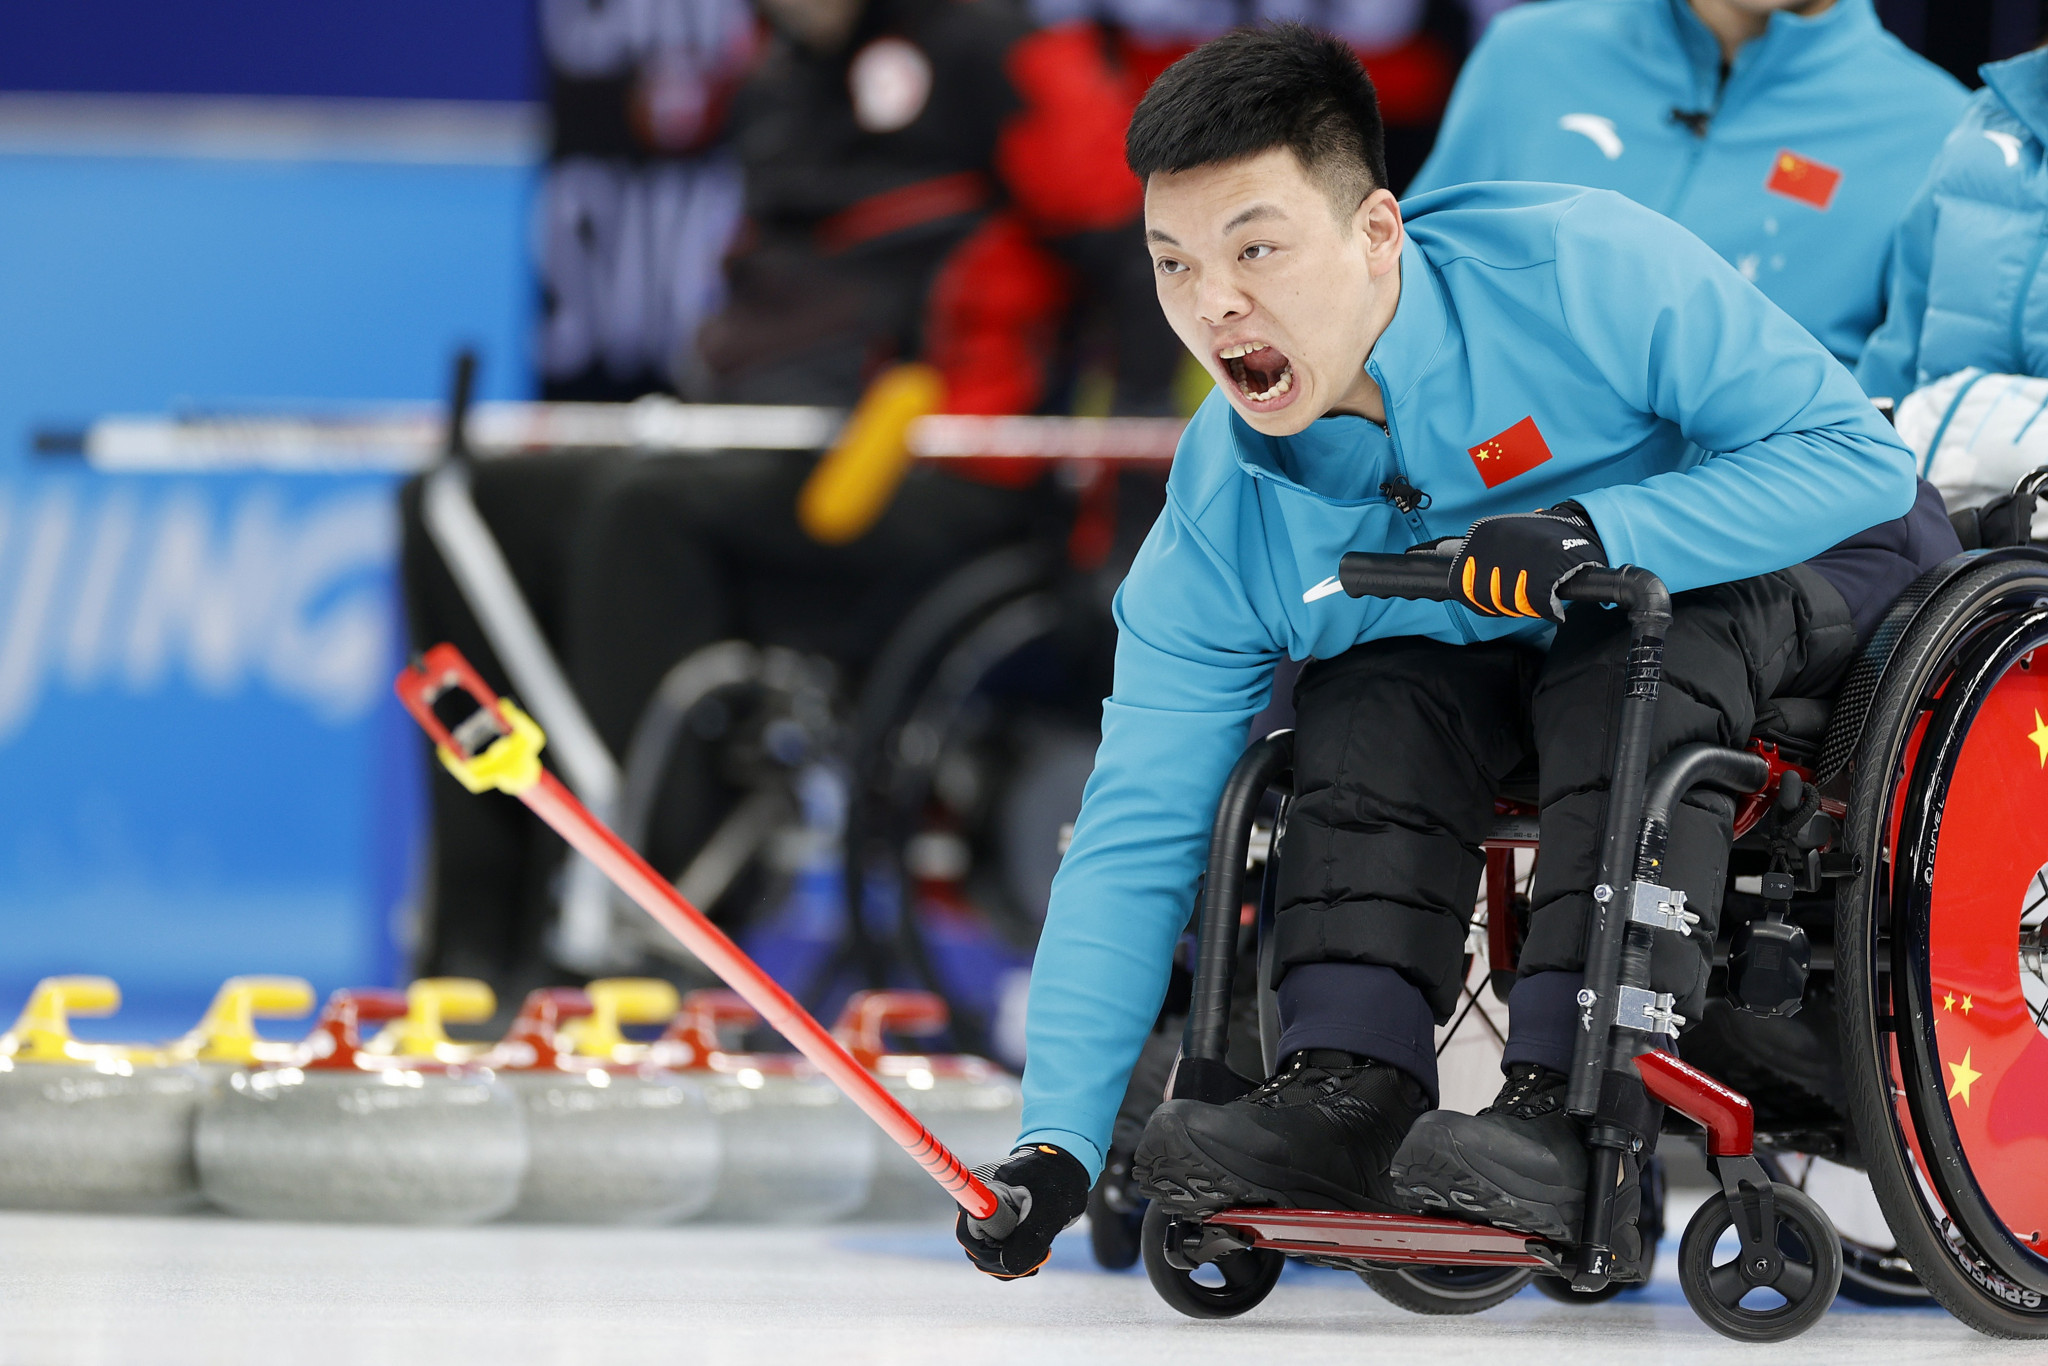 insidethegames is reporting LIVE on the Beijing 2022 Winter Paralympics